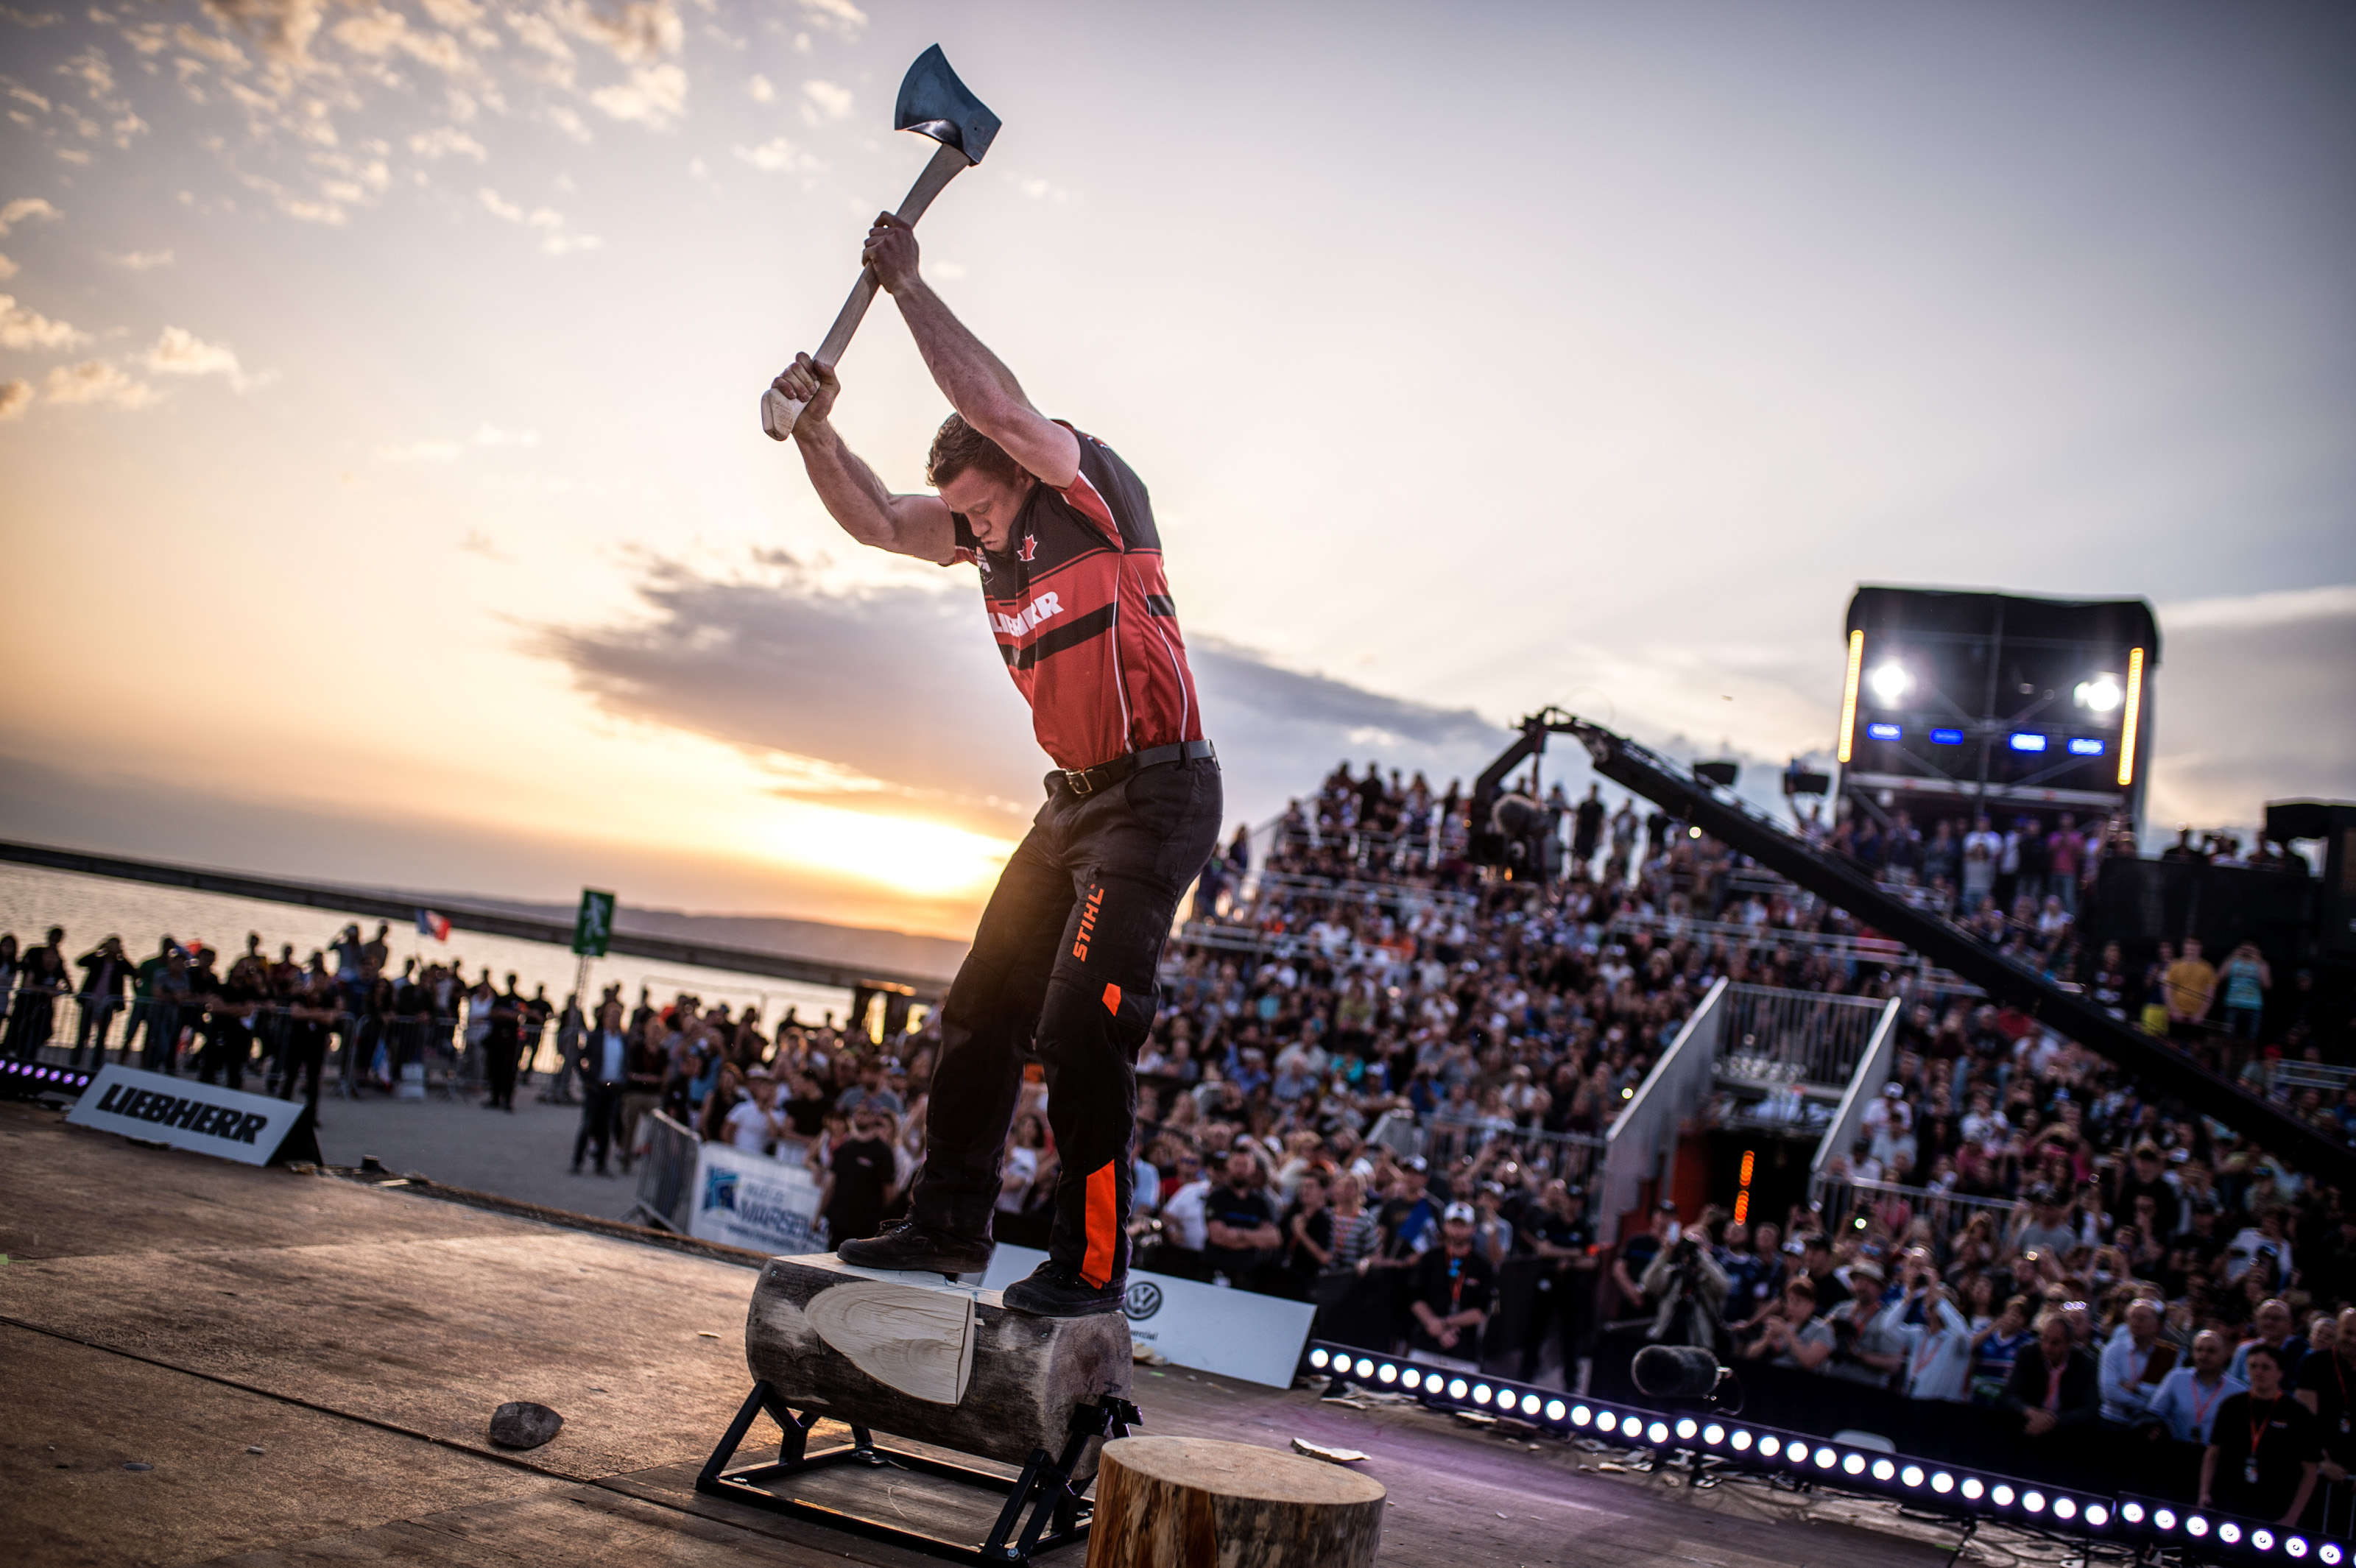 STIHL Timbersports - #DidYouKnow that all our athletes wear safety